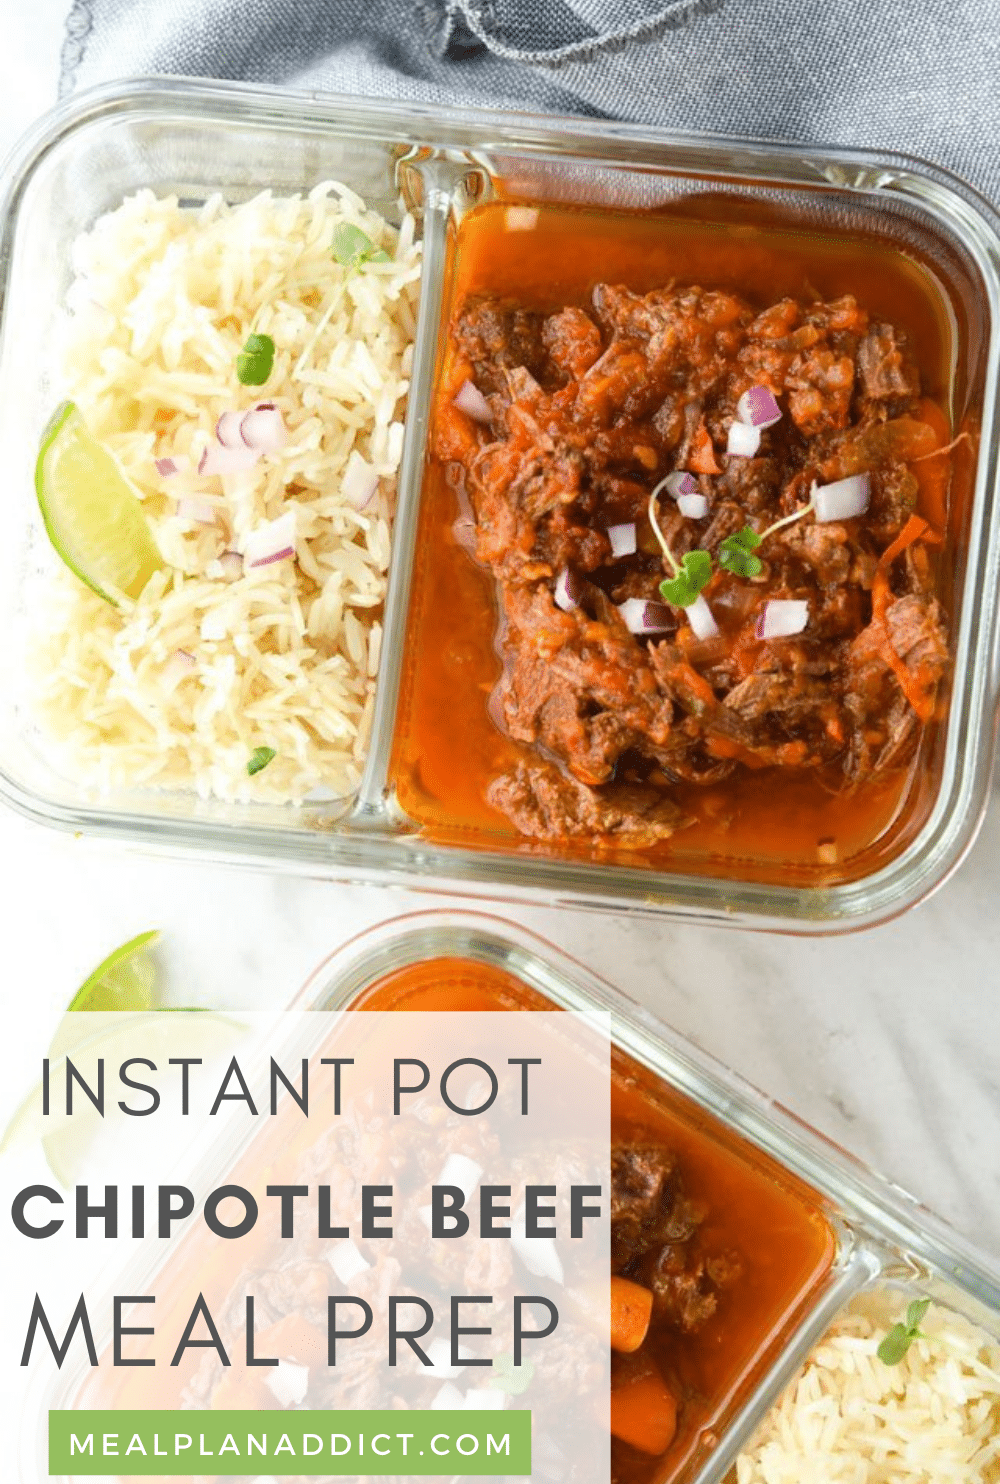 Chipotle beef pin for Pinterest